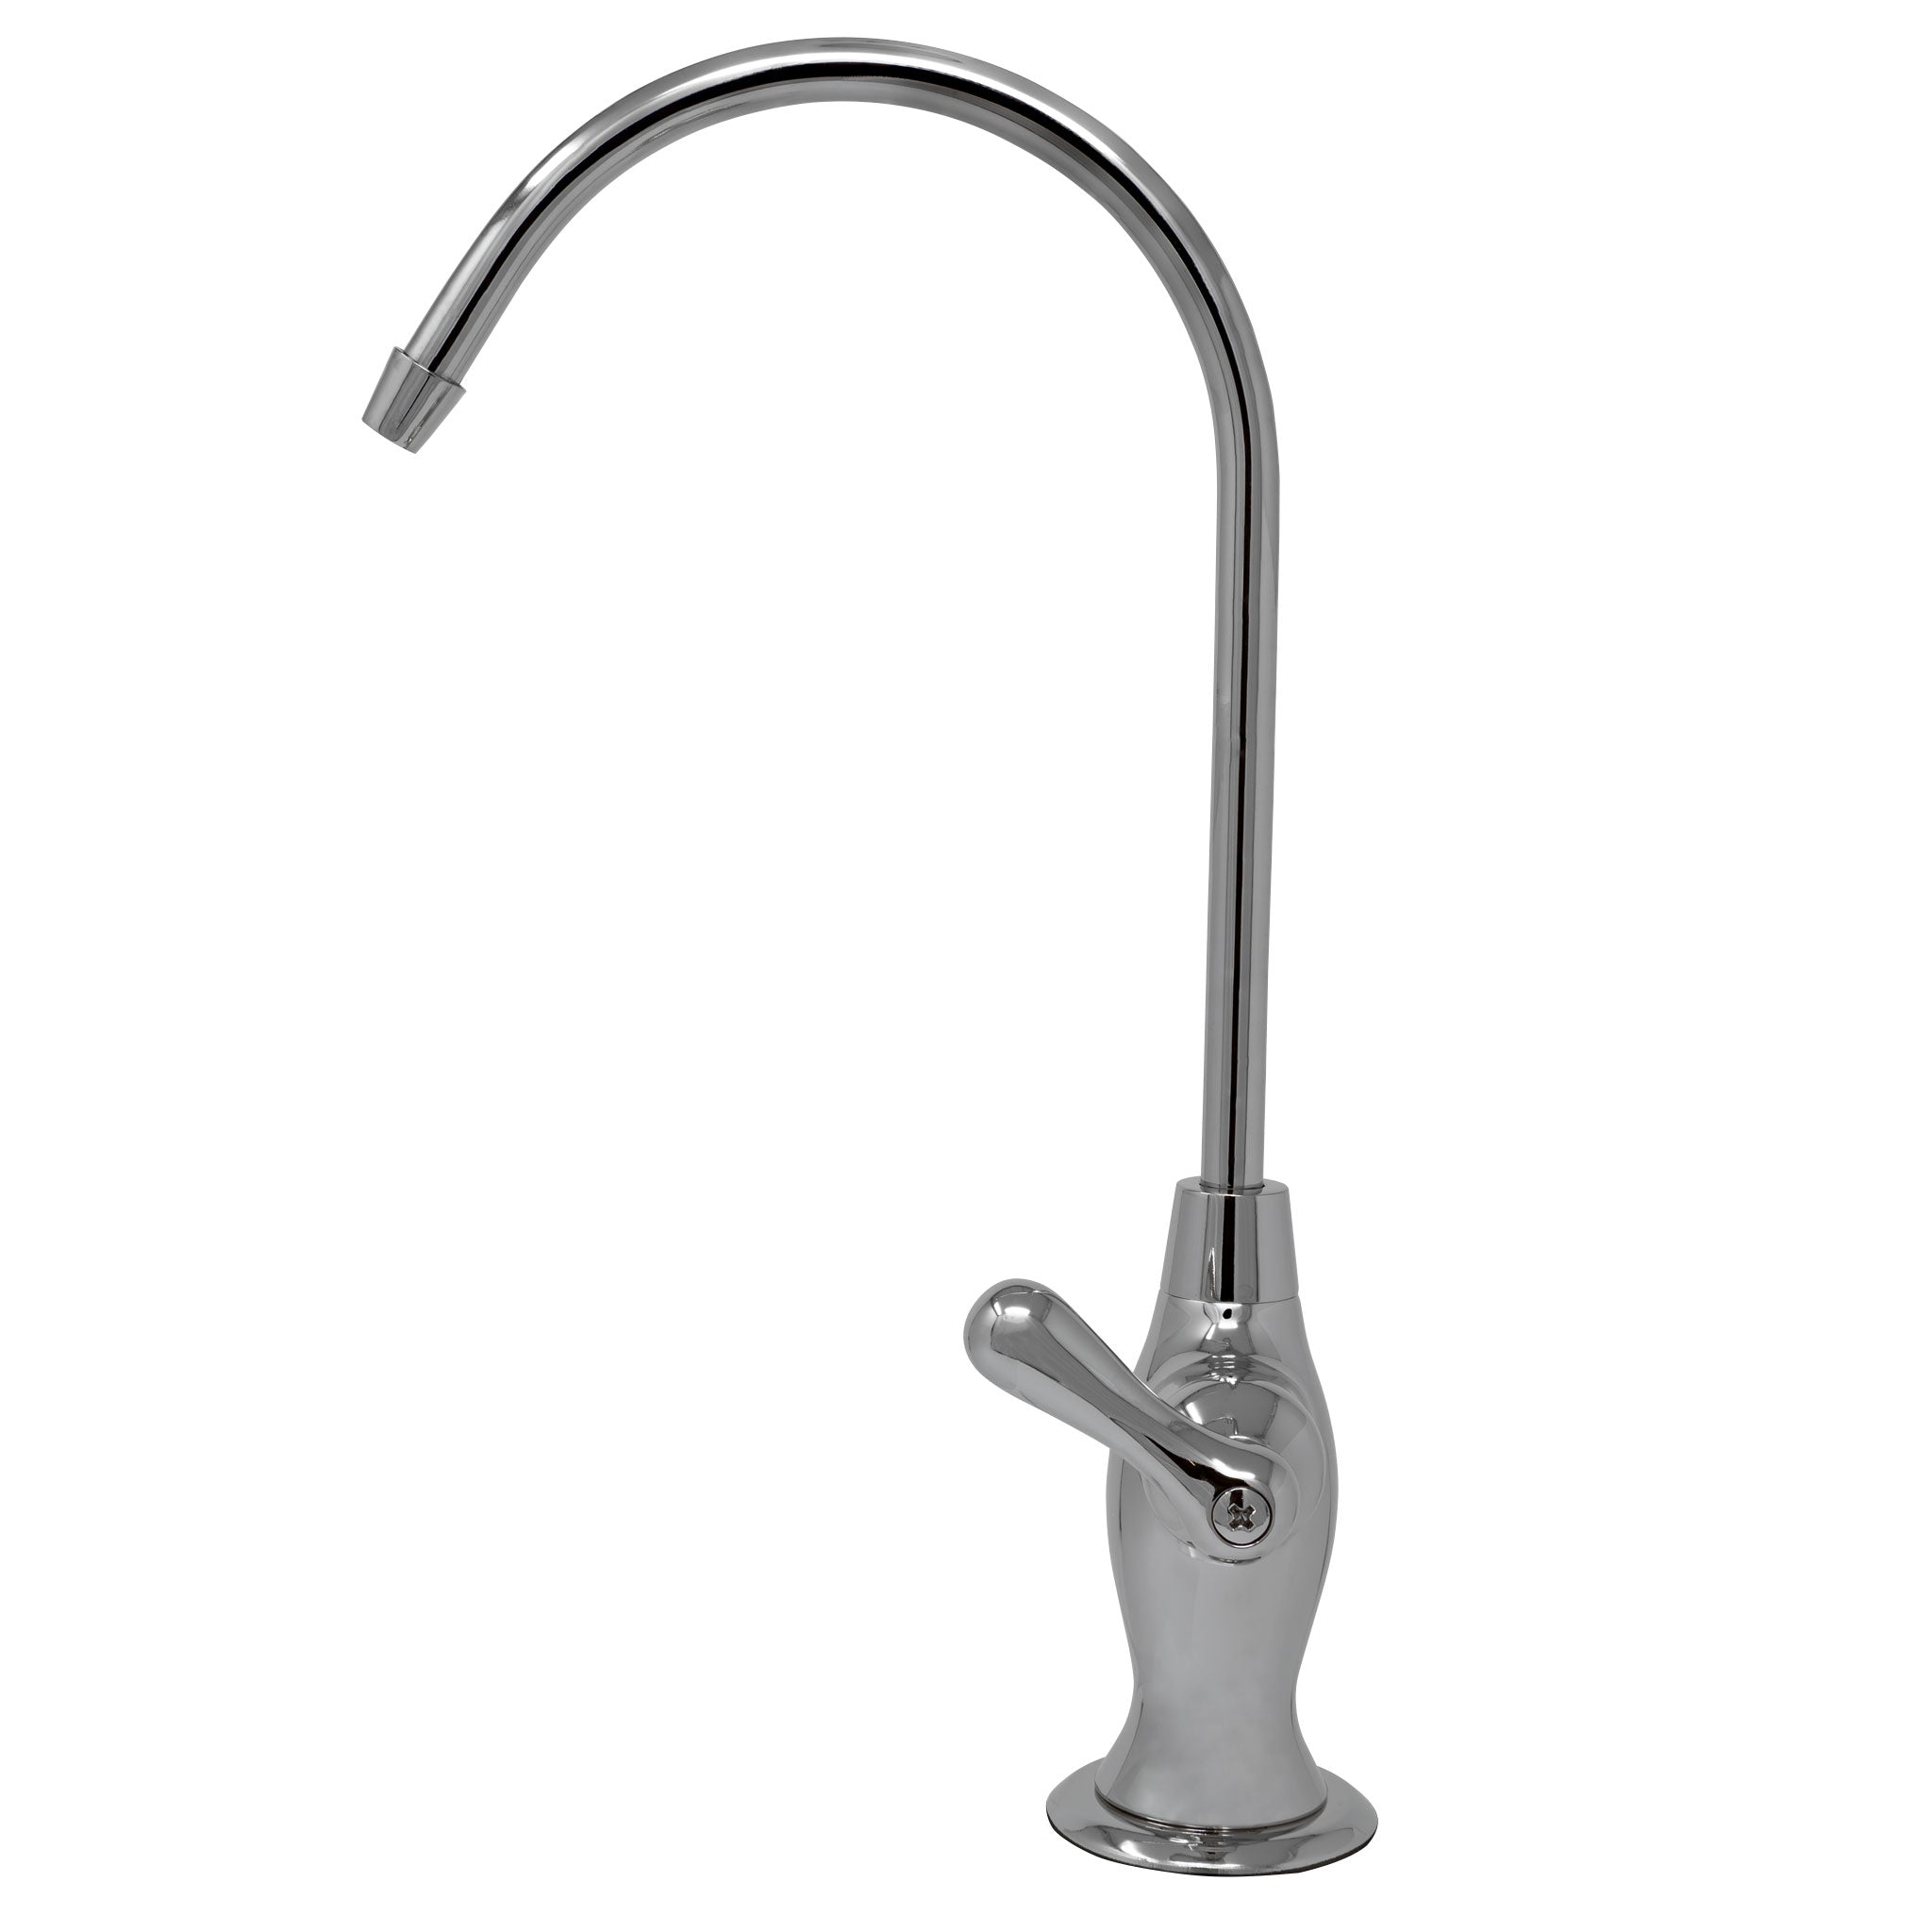 Water Filtration Faucet Vase Style Polished Nickel Reverse Osmosis Non Air Gap. Certified by NSF.